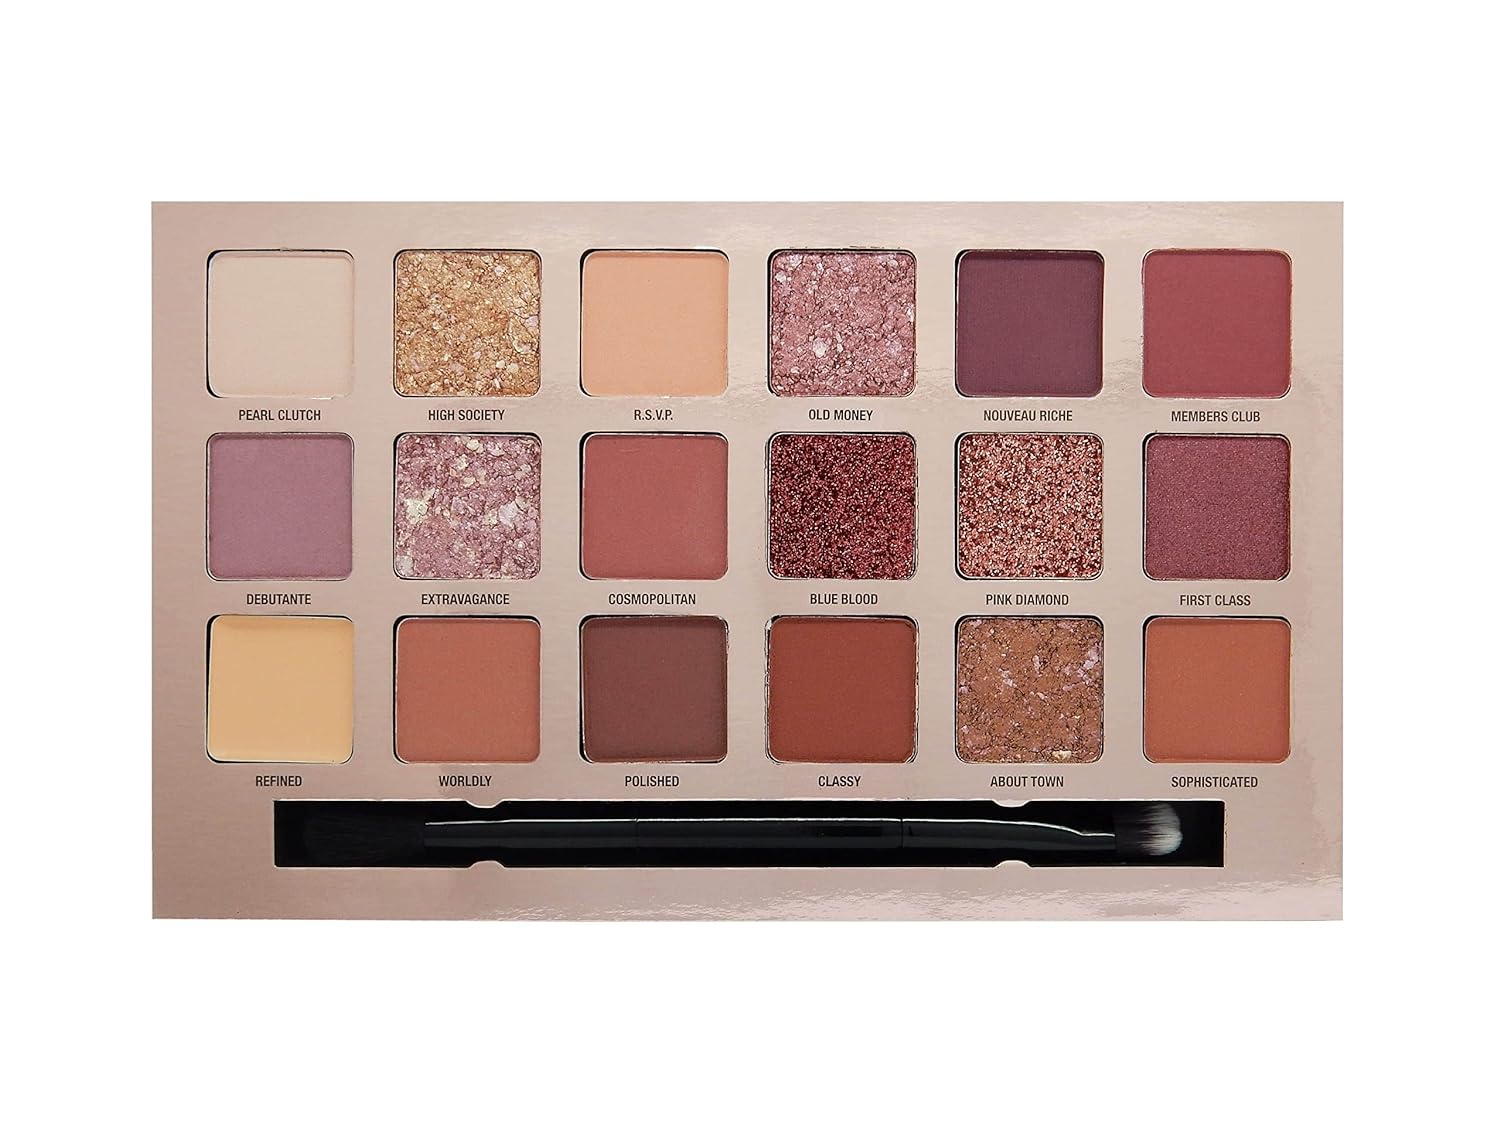 W7 Socialite Pressed Pigment Palette - 18 Pink Nude Colors - Flawless Long-Lasting Glam Makeup : Beauty & Personal Care